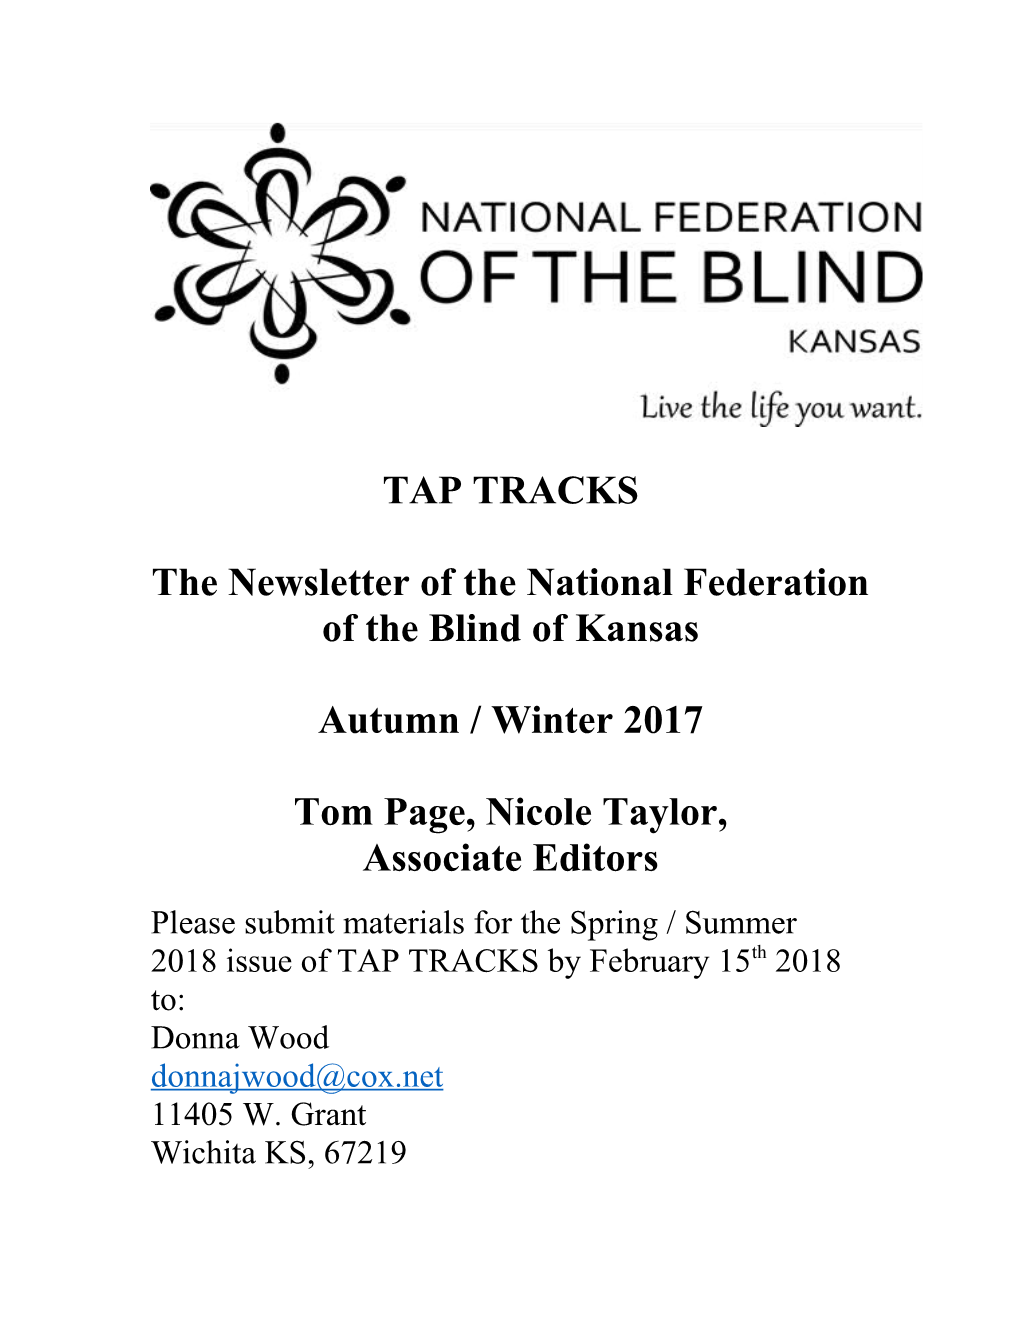 The Newsletter of the National Federationof the Blind of Kansas